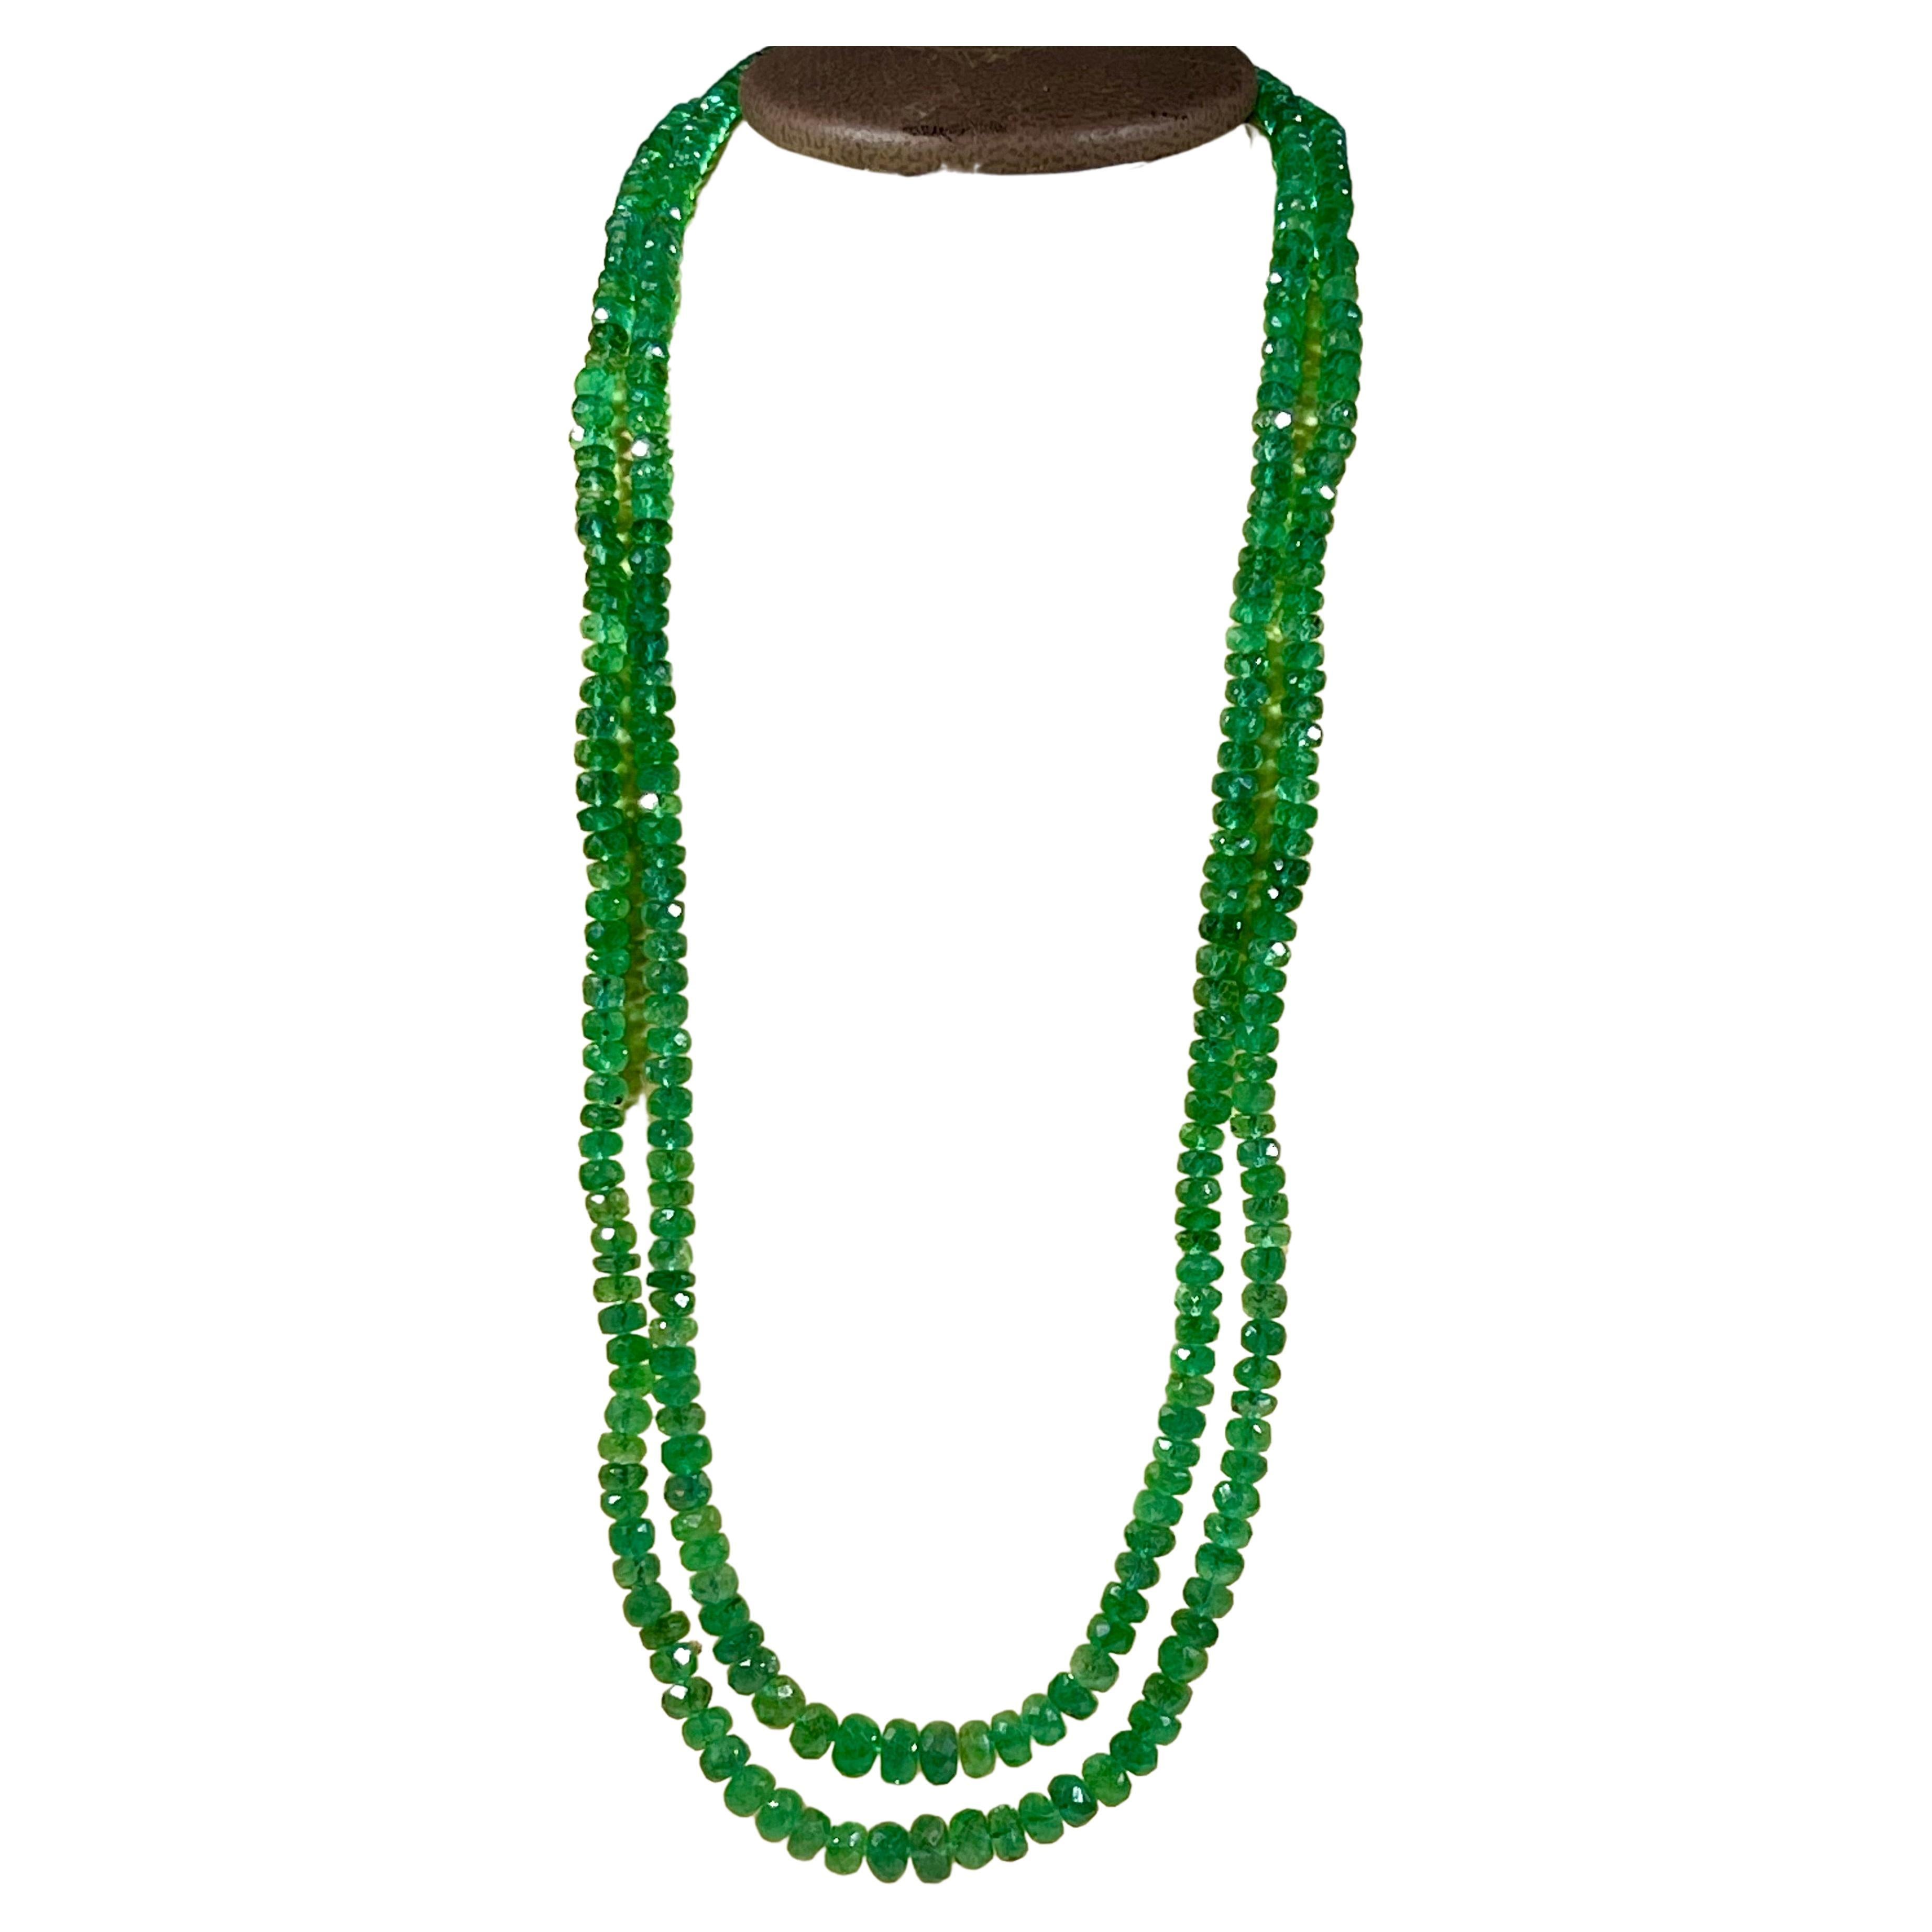 Approximately 145 ct Fine Natural Emerald Beads 2 Line Necklace with 14 Kt Yellow Gold Clasp 
This spectacular Necklace   consisting of approximately 144 Ct  of fine beads.
The shine sparkle and brilliance with deep green color is just out of this